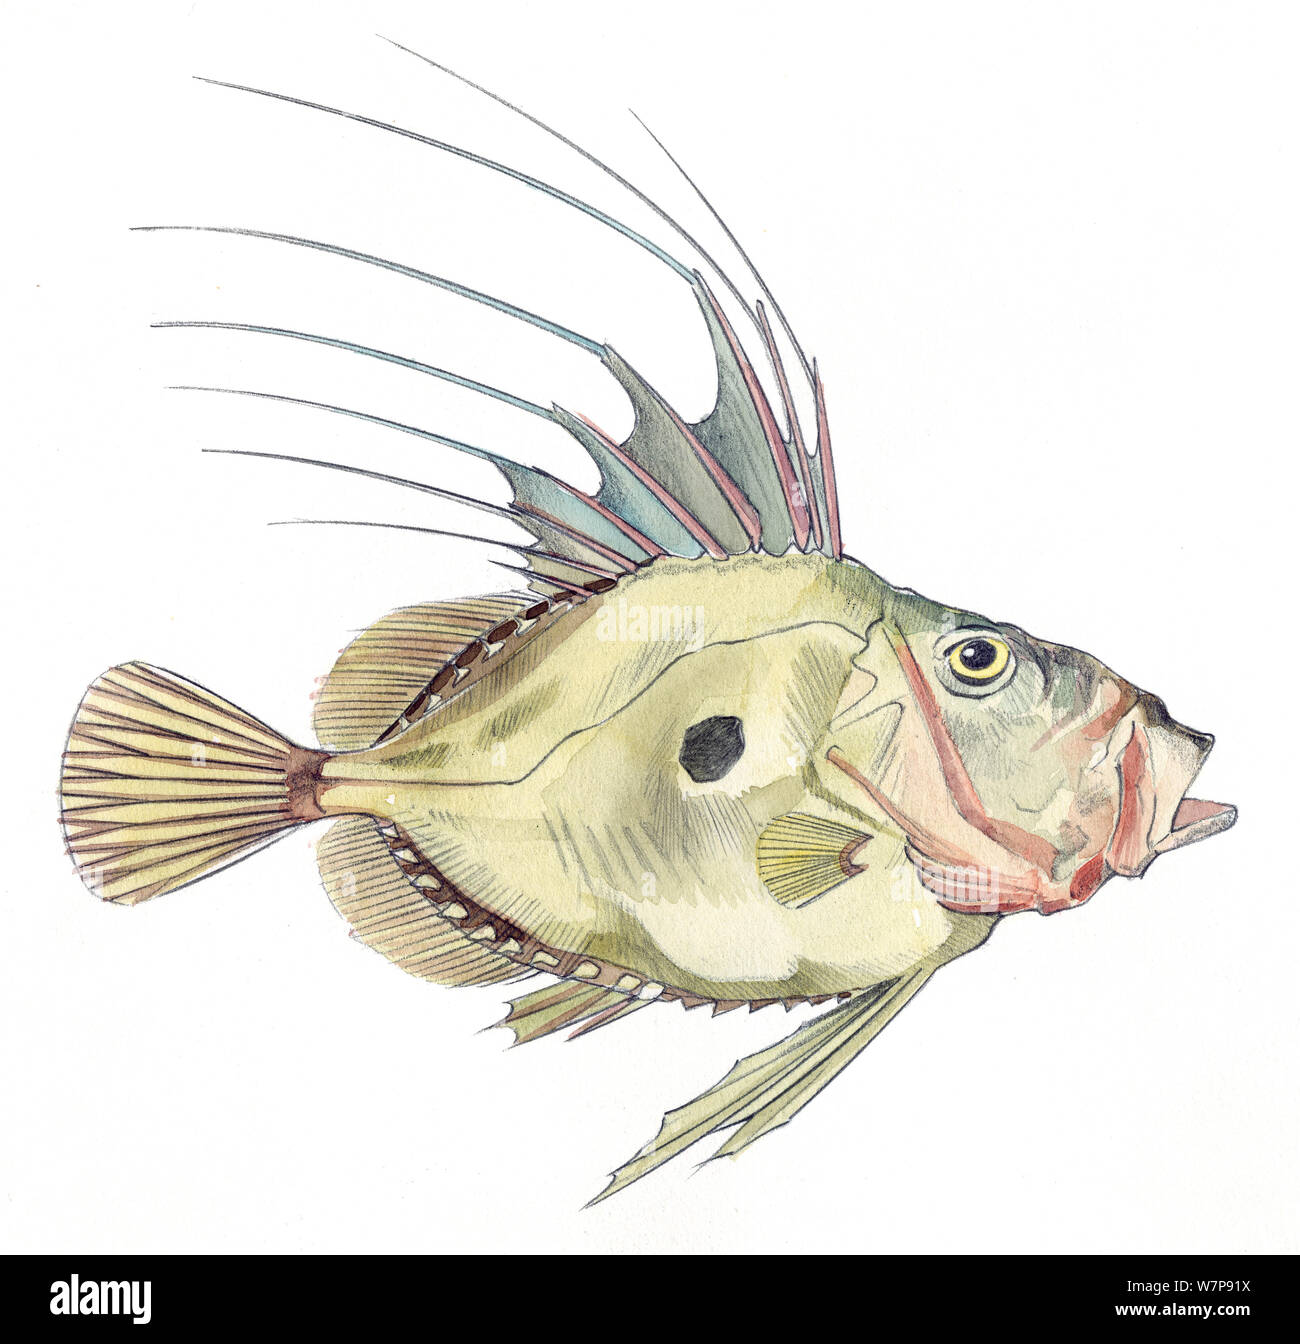 Illustration of John Dory (Zeus faber). Pencil and watercolor painting. Stock Photo